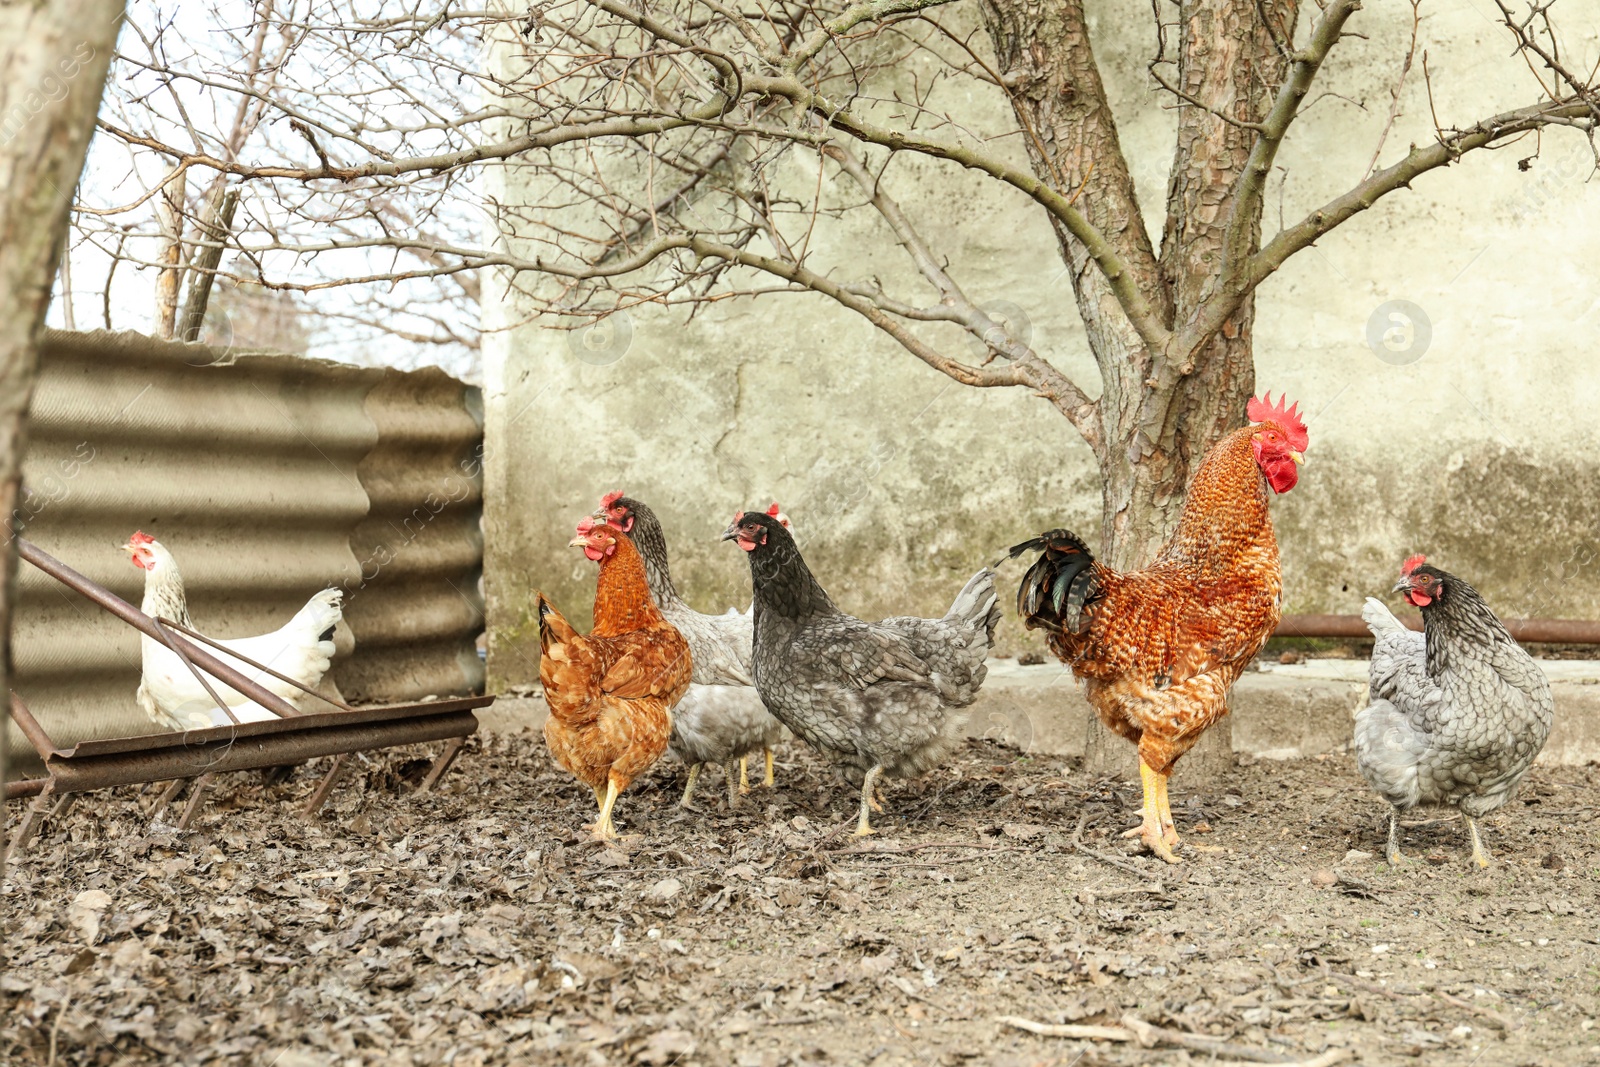 Photo of Flock of chickens and rooster in yard